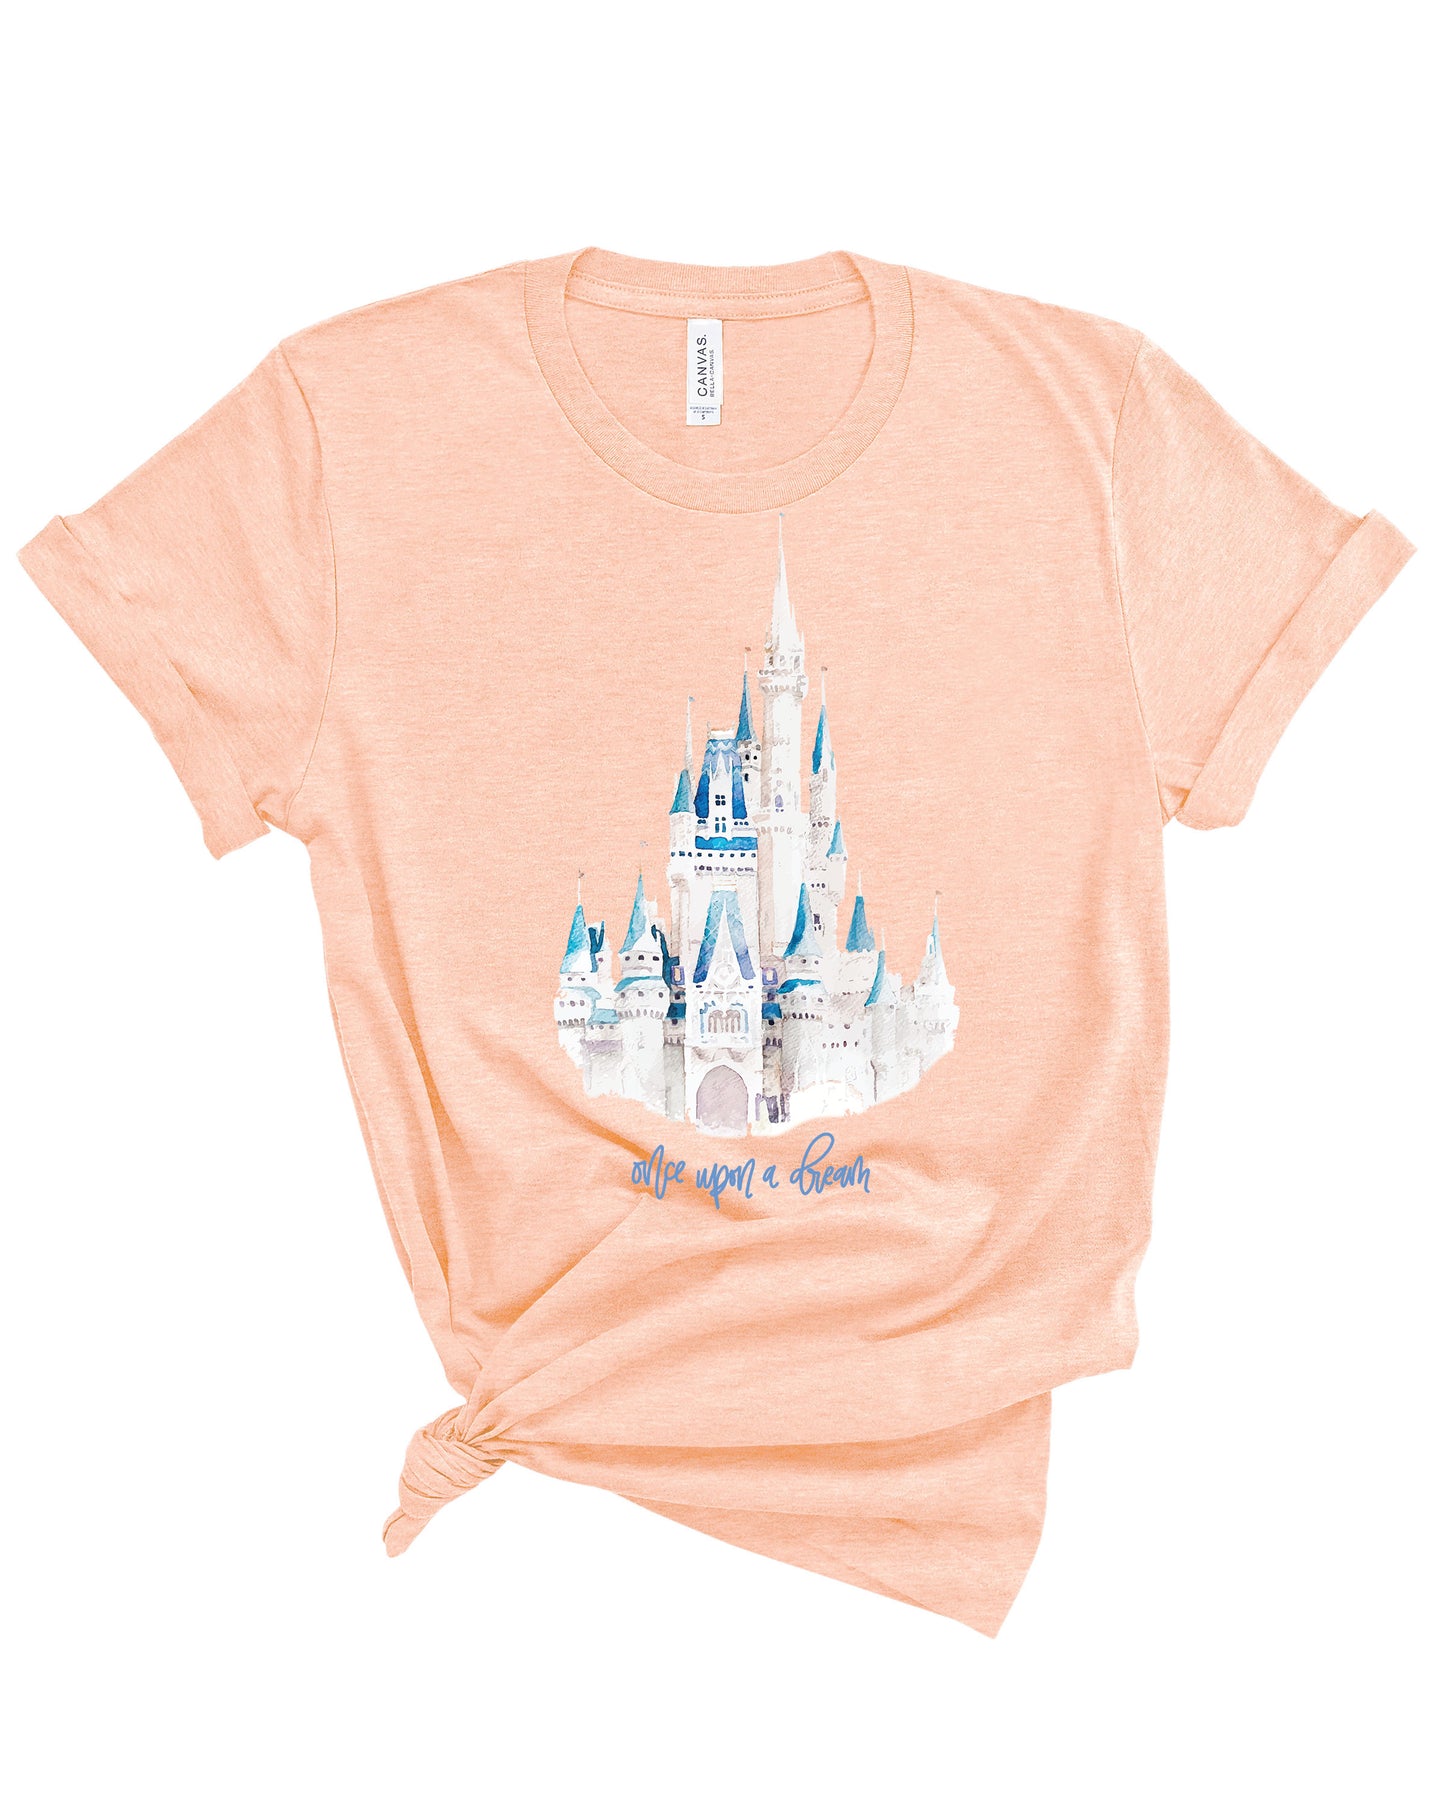 Once Upon A Dream | Tee | Adult-Adult Tee-Sister Shirts-Sister Shirts, Cute & Custom Tees for Mama & Littles in Trussville, Alabama.